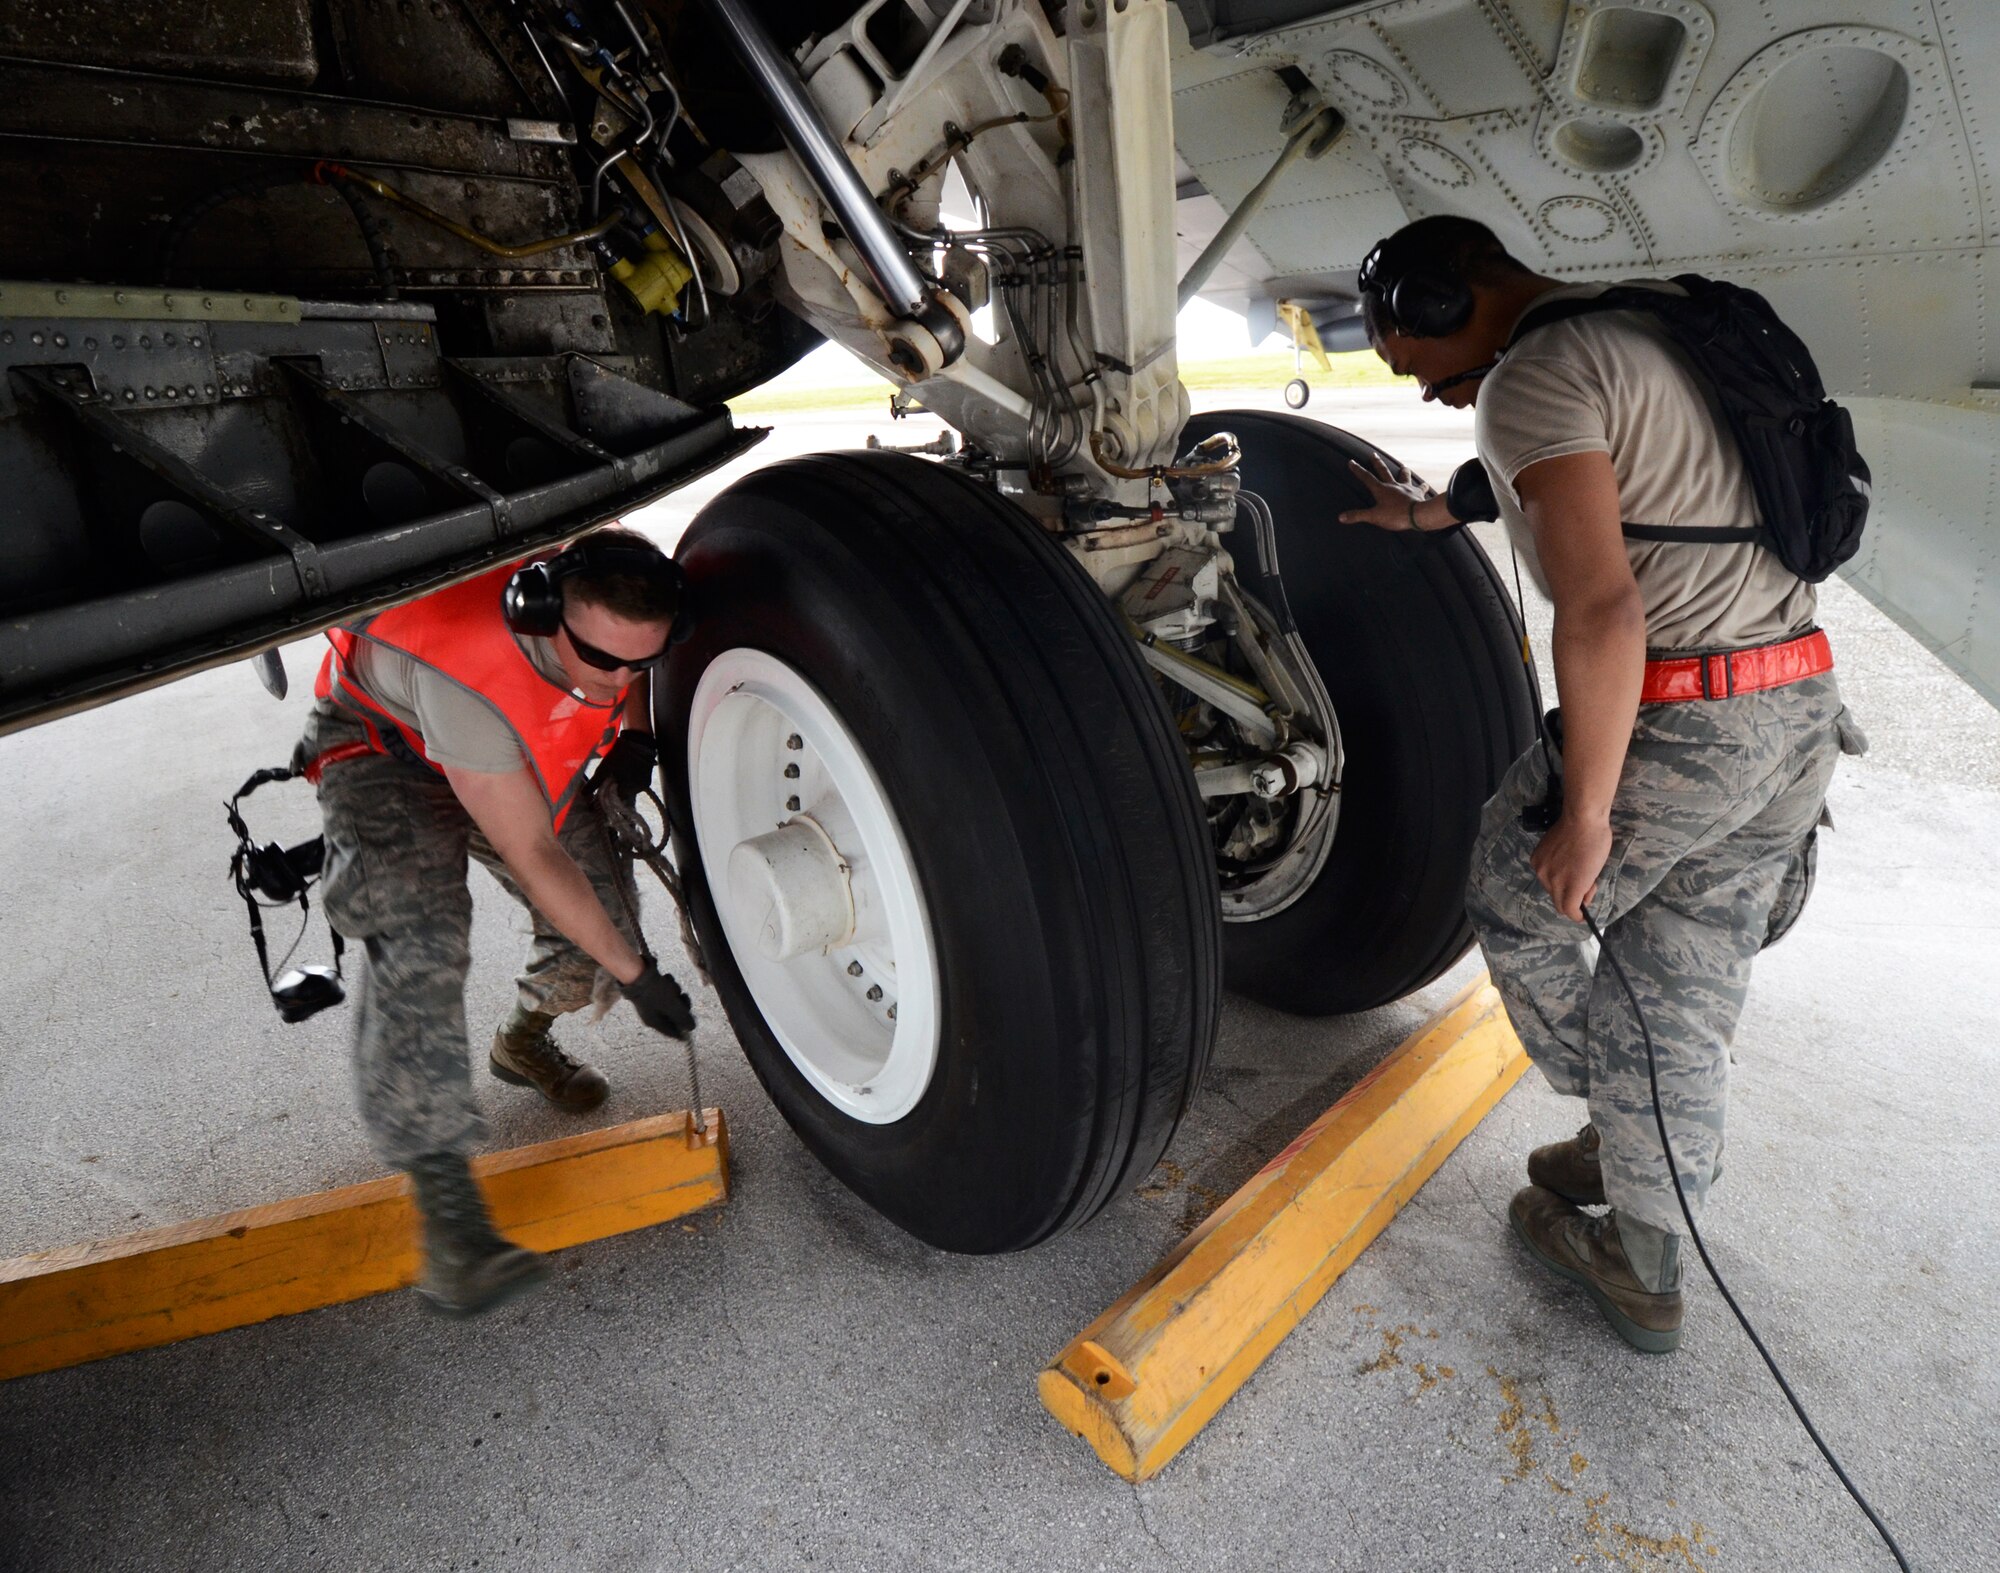 Airmen 1st Class Kevin Carmel (Left), and Julius Smith, 36th Expeditionary Aircraft Maintenance Squadron crew chiefs deployed from Minot Air Force Base, N.D., remove chalks from the tires of a B-52 Stratofortress during a preflight check at Andersen Air Force Base, Guam, April 2, 2013. A new rotation of aircrews, maintenance personnel and aircraft arrived to Guam March 31 to replace the 96th Expeditionary Bomb Squadron in support of U.S. Pacific Command’s continuous bomber presence mission. (U.S. Air Force photo by Senior Airman Benjamin Wiseman/Released)